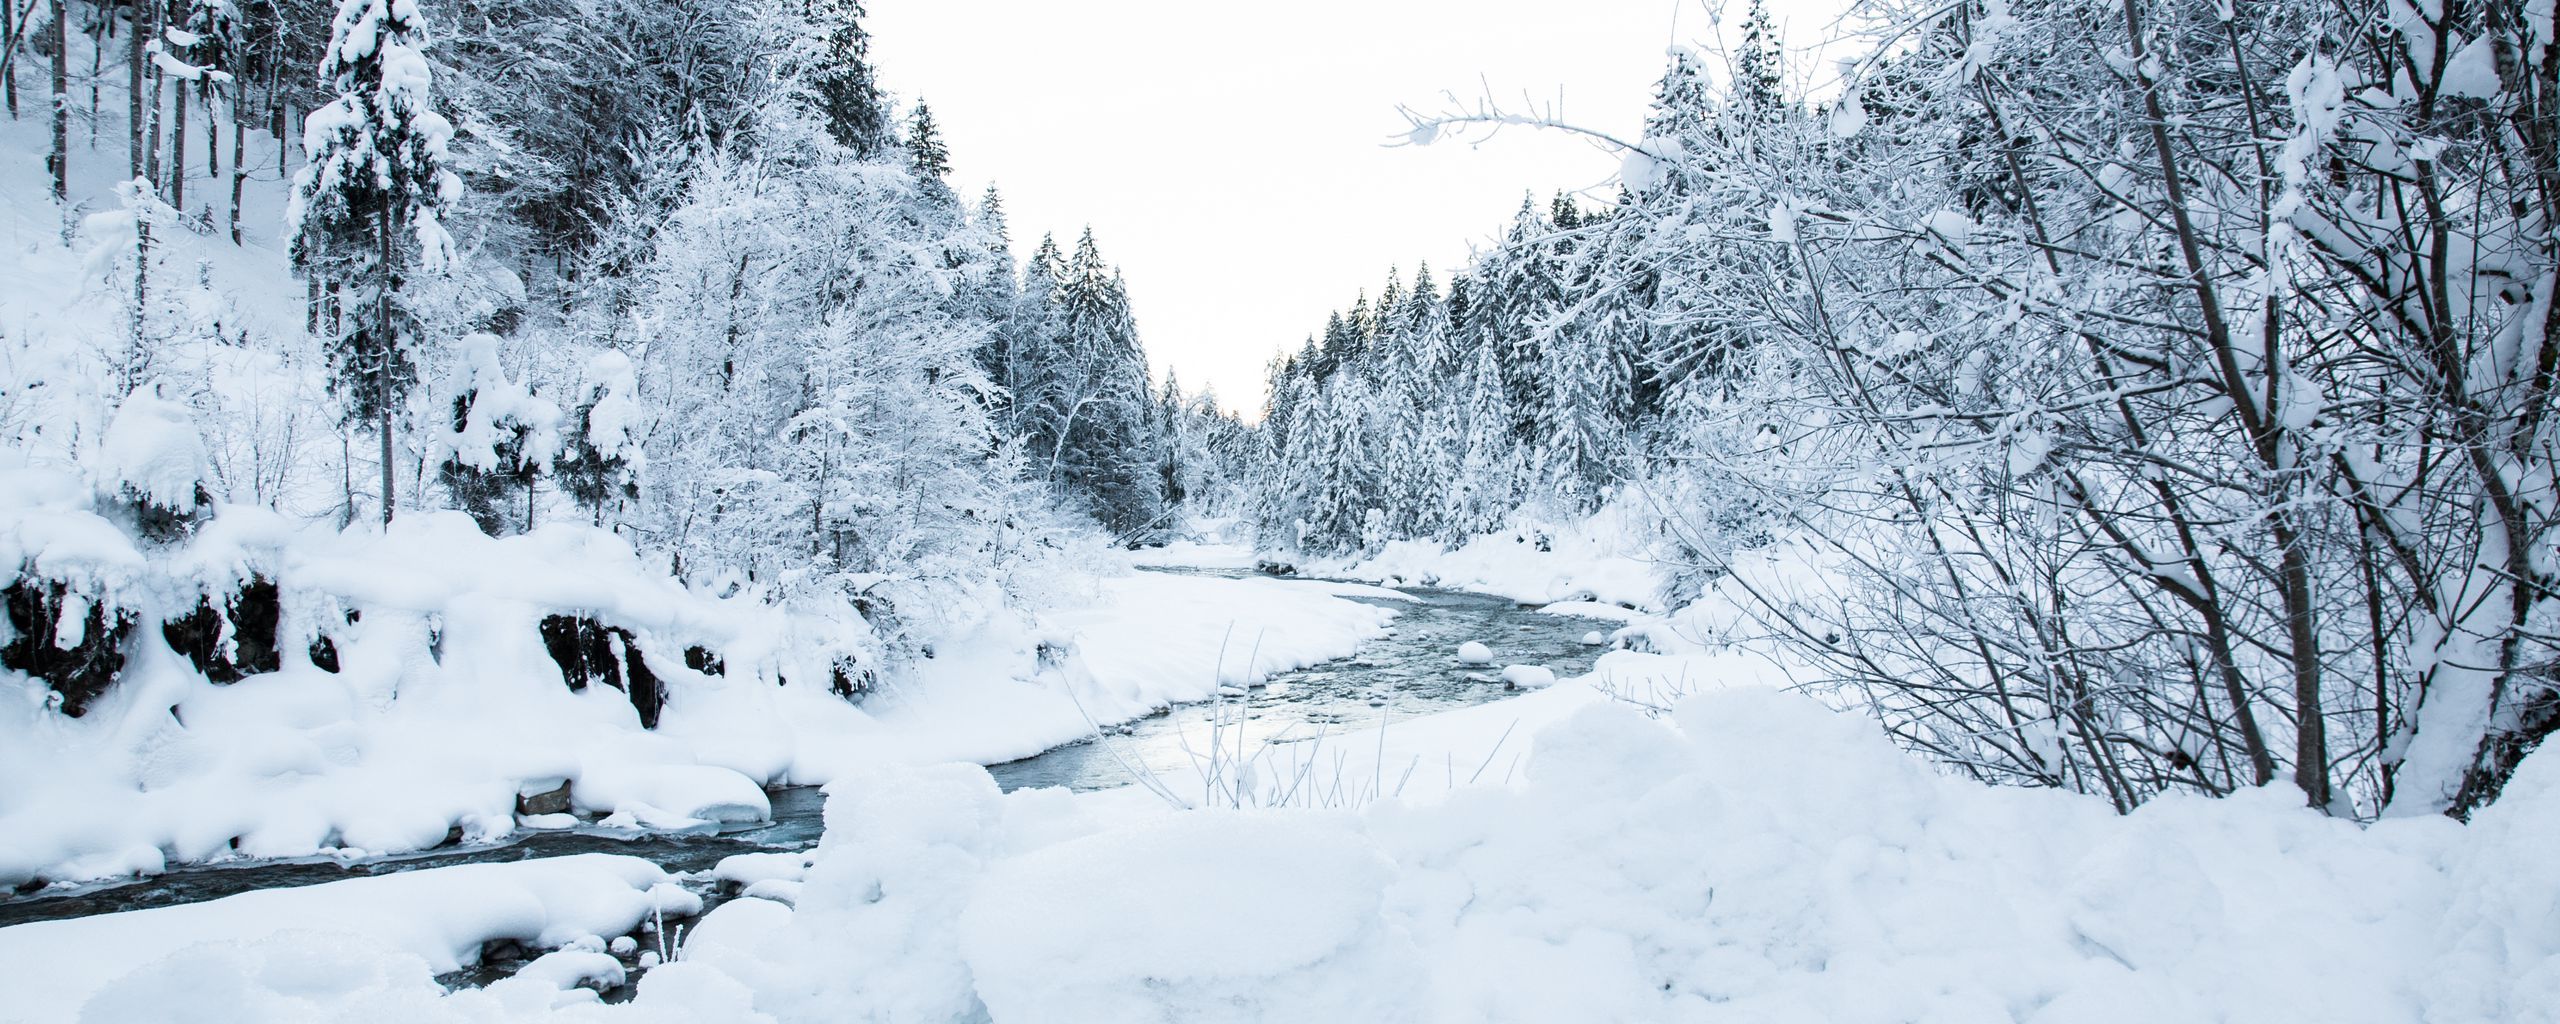 Download wallpaper 2560x1024 river, trees, snow, landscape, winter ultrawide monitor HD background